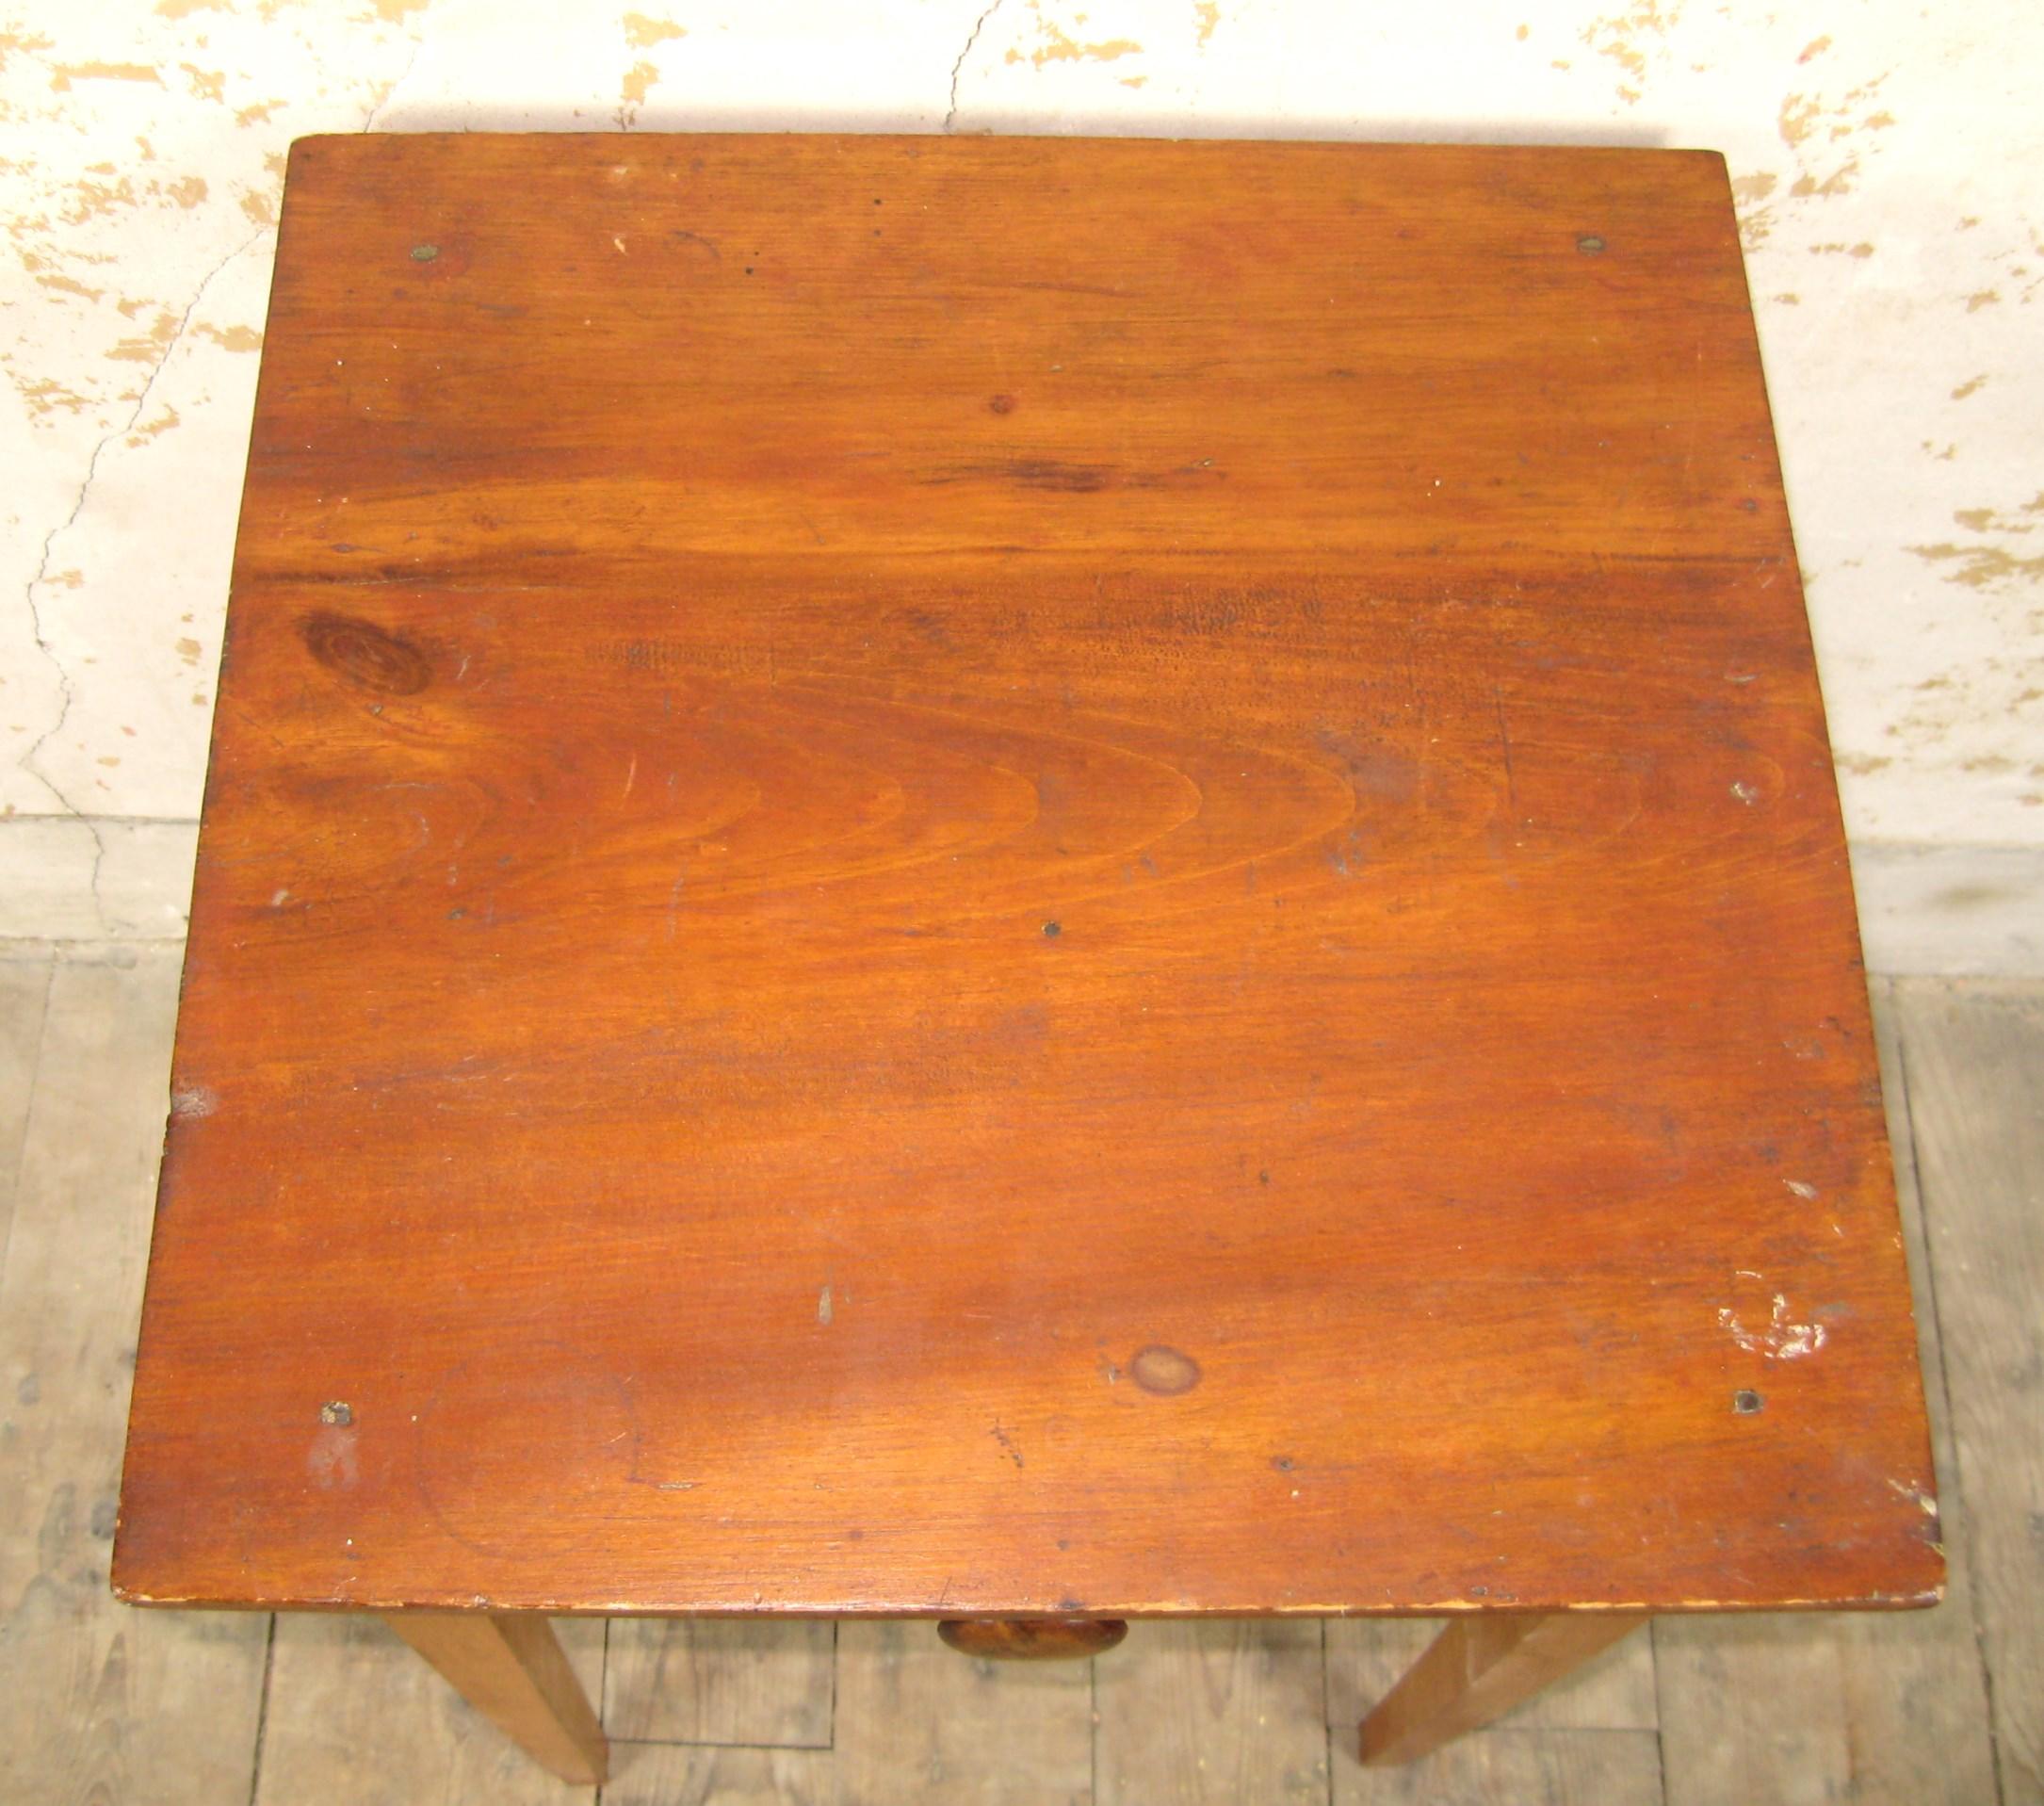 Primitive 19th Century primitive Farm work 1 Drew table with Tapered leg For Sale